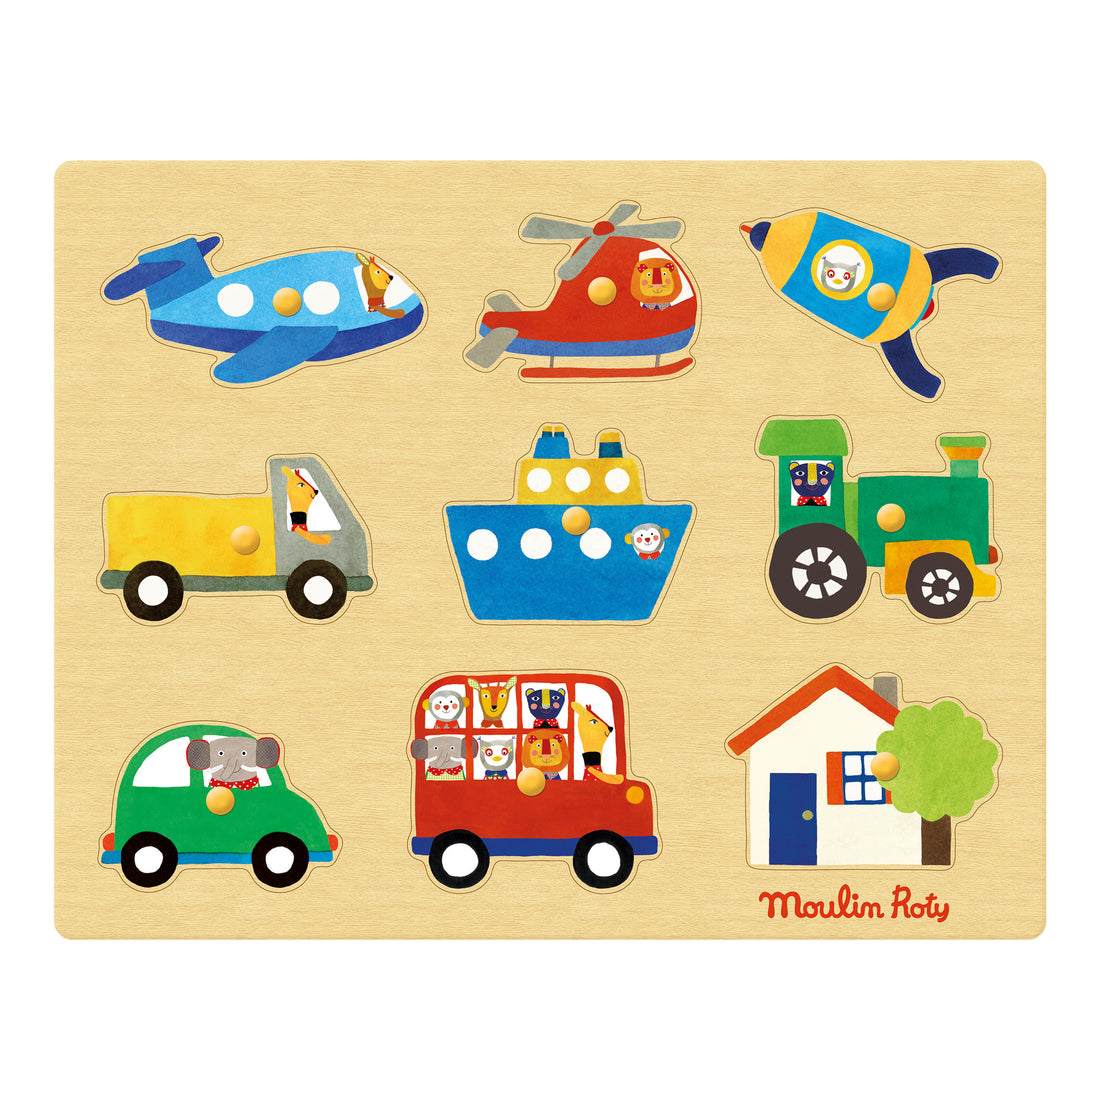 moulin-roty-puzzle-pop-transport-play-puzzle-transport-kid-moul-661324-01